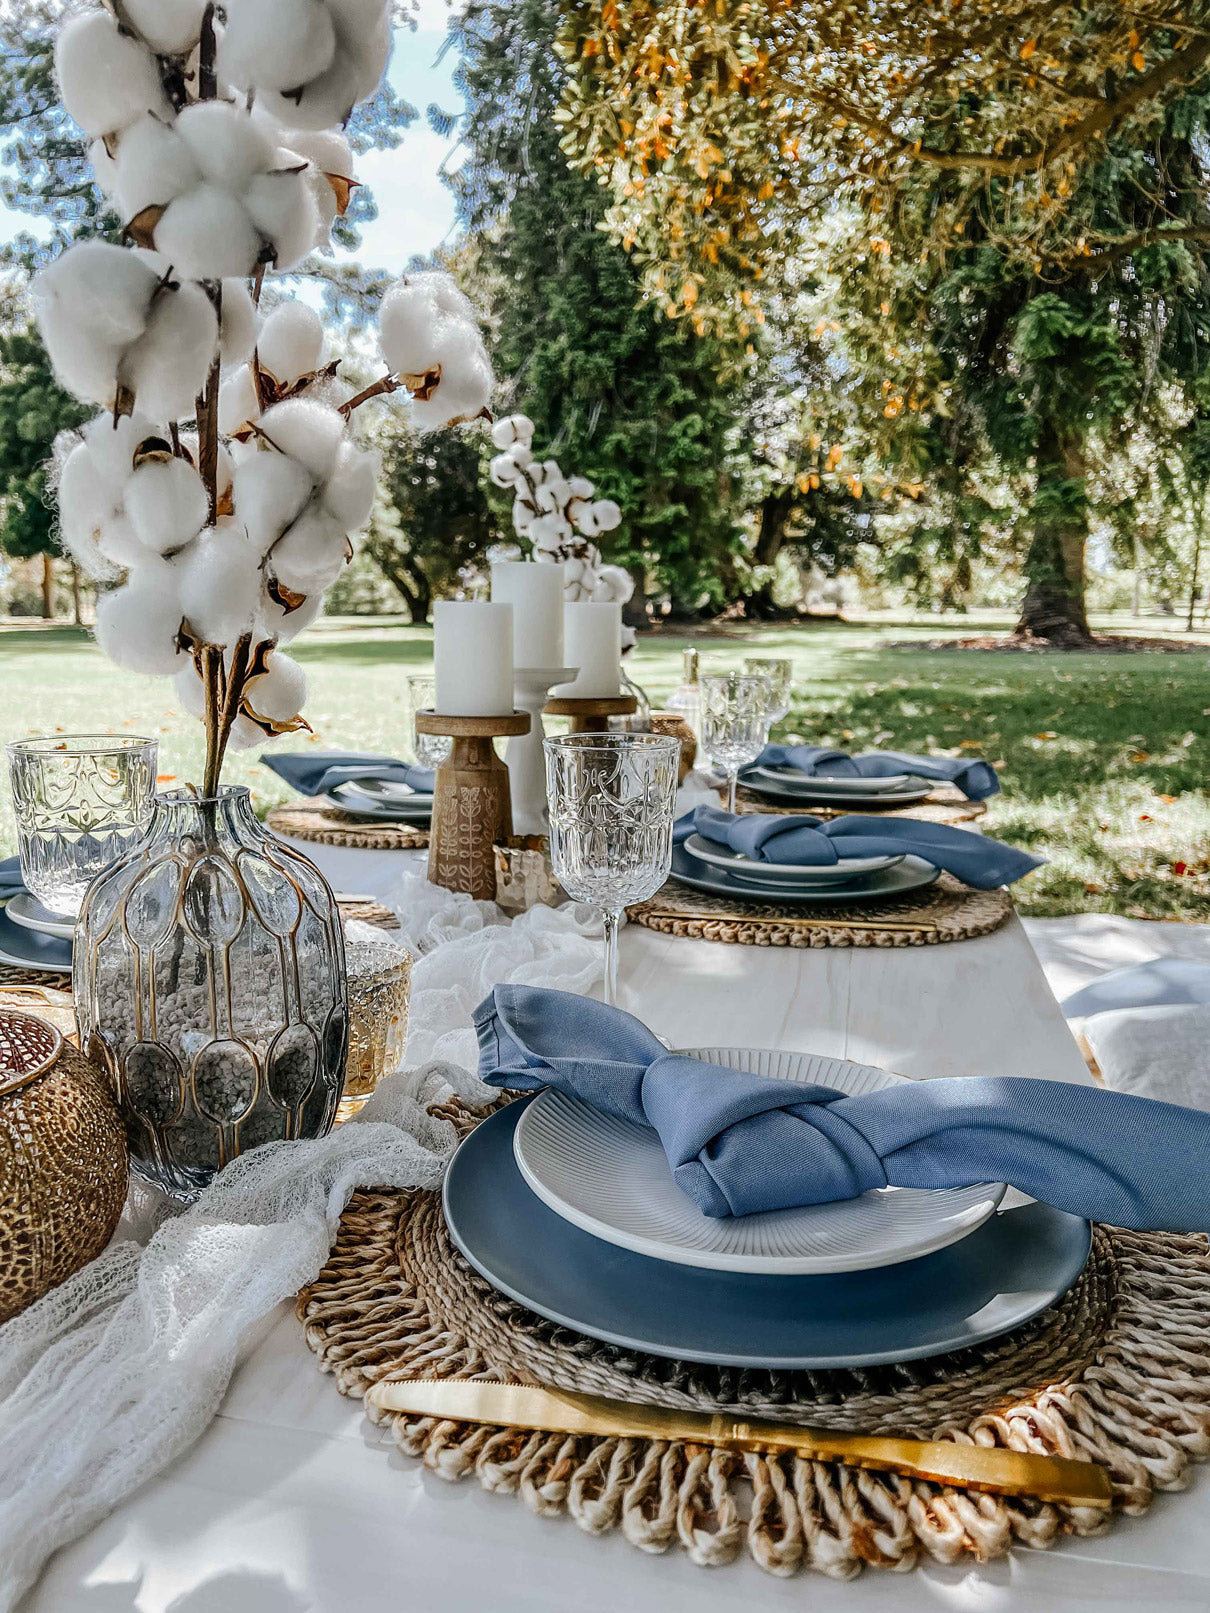 baby blue picnic in the park - table setting details with cotton and blue napkins